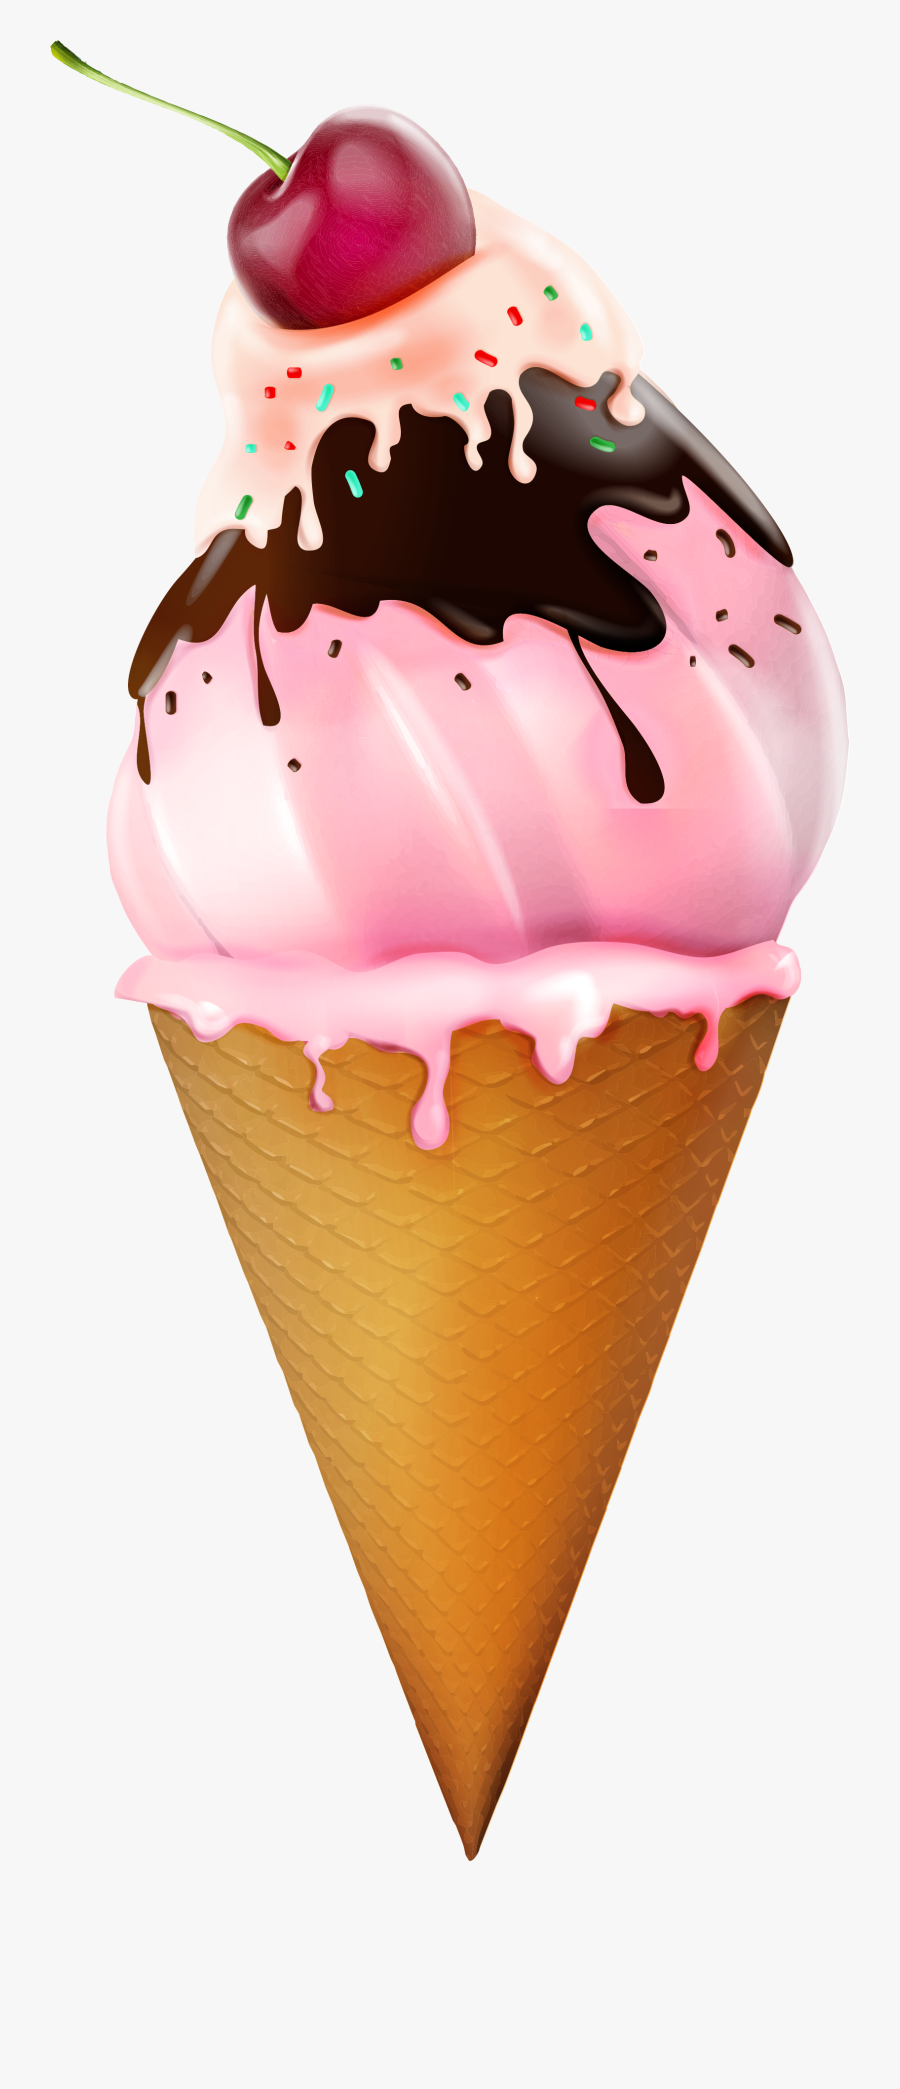 Ice Cream Cone 0 Images About Ice Printables On Clipart - Transparent Background Ice Cream Cone Clipart, Transparent Clipart